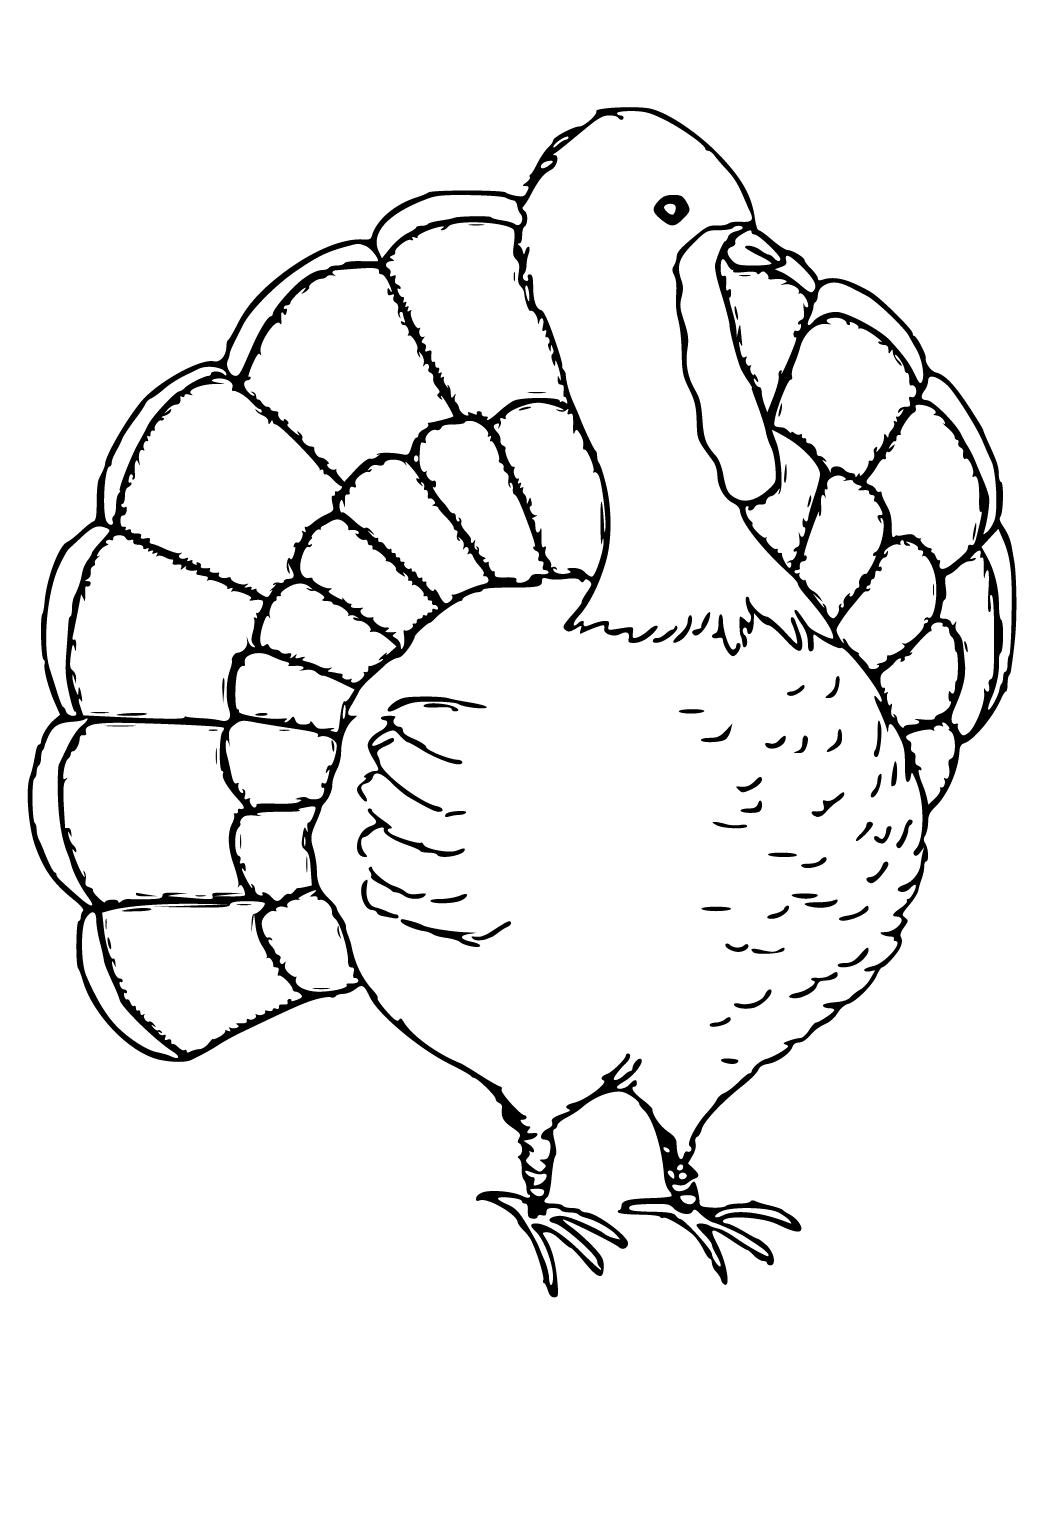 Free printable turkey easy coloring page for adults and kids